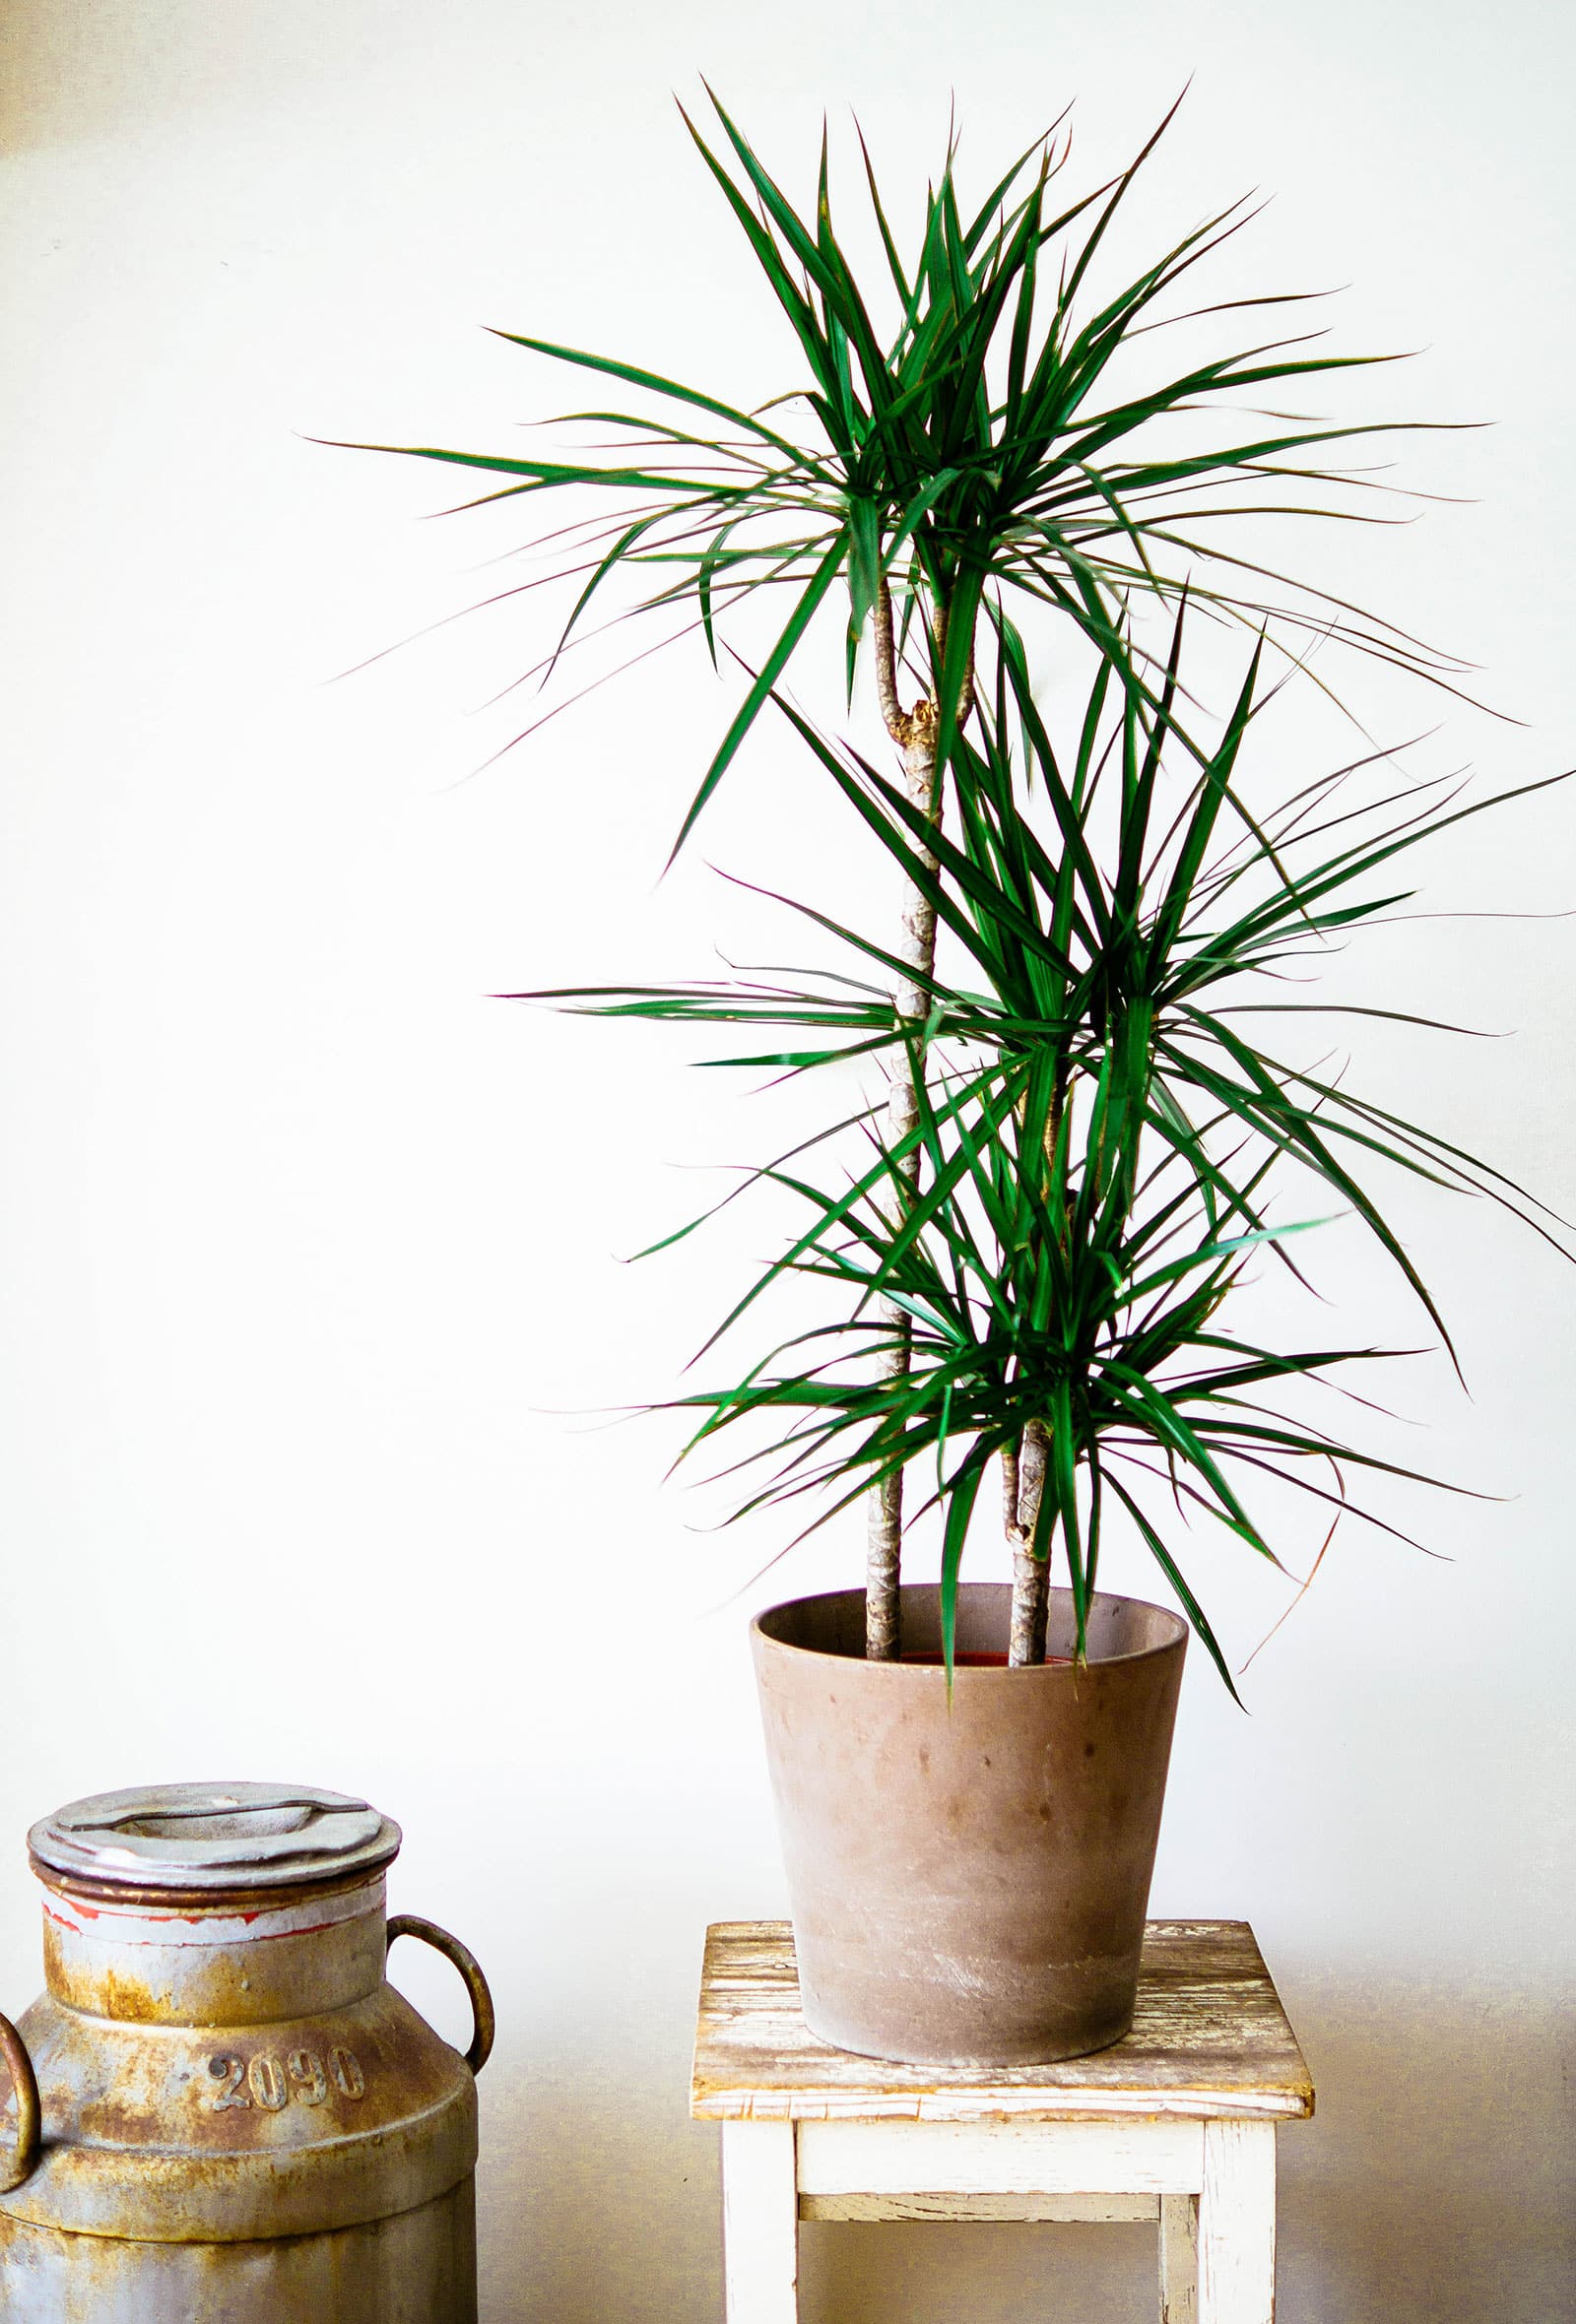 Dracaena marginata plant in a brown clay pot, shot on a rustic white side table next to a vintage jug